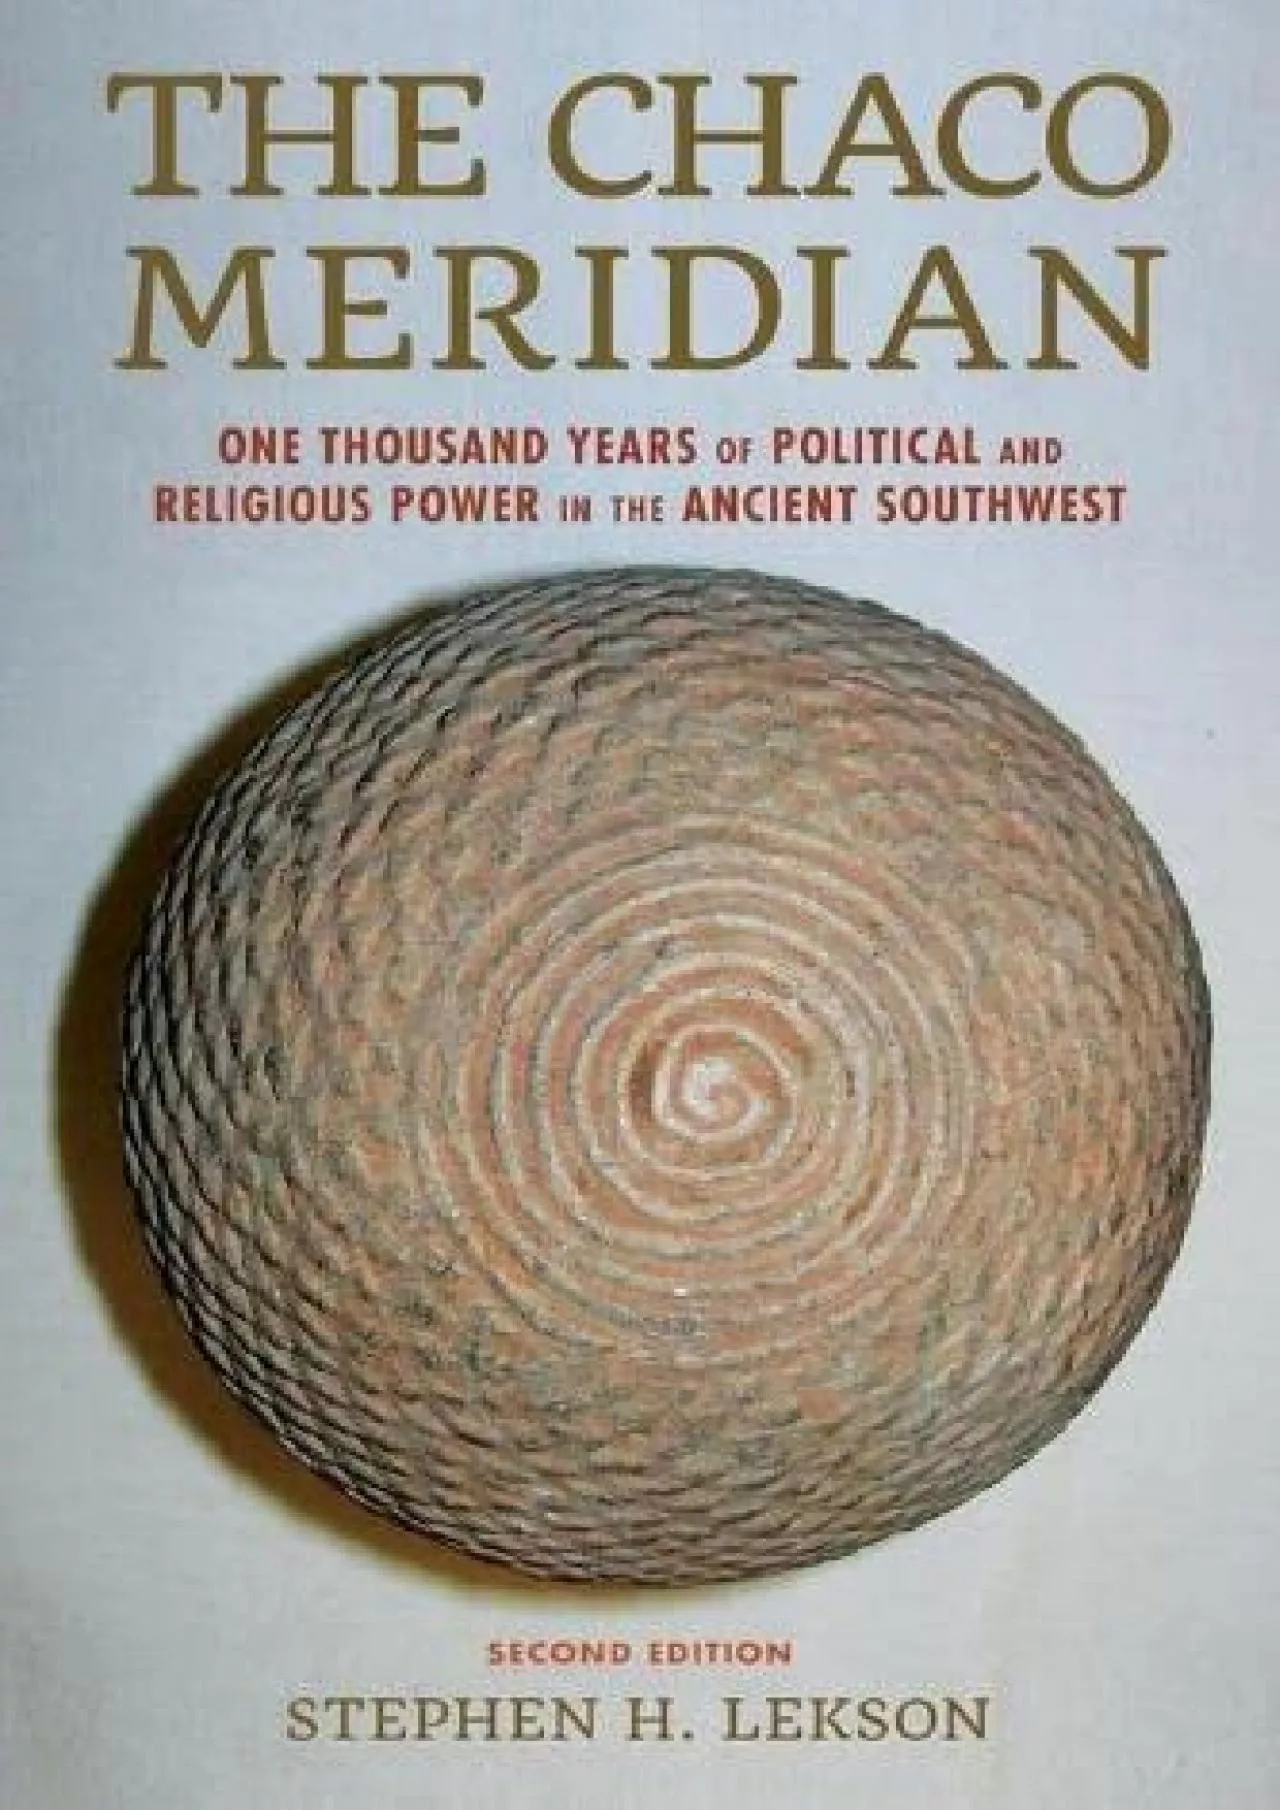 (DOWNLOAD)-The Chaco Meridian: One Thousand Years of Political and Religious Power in